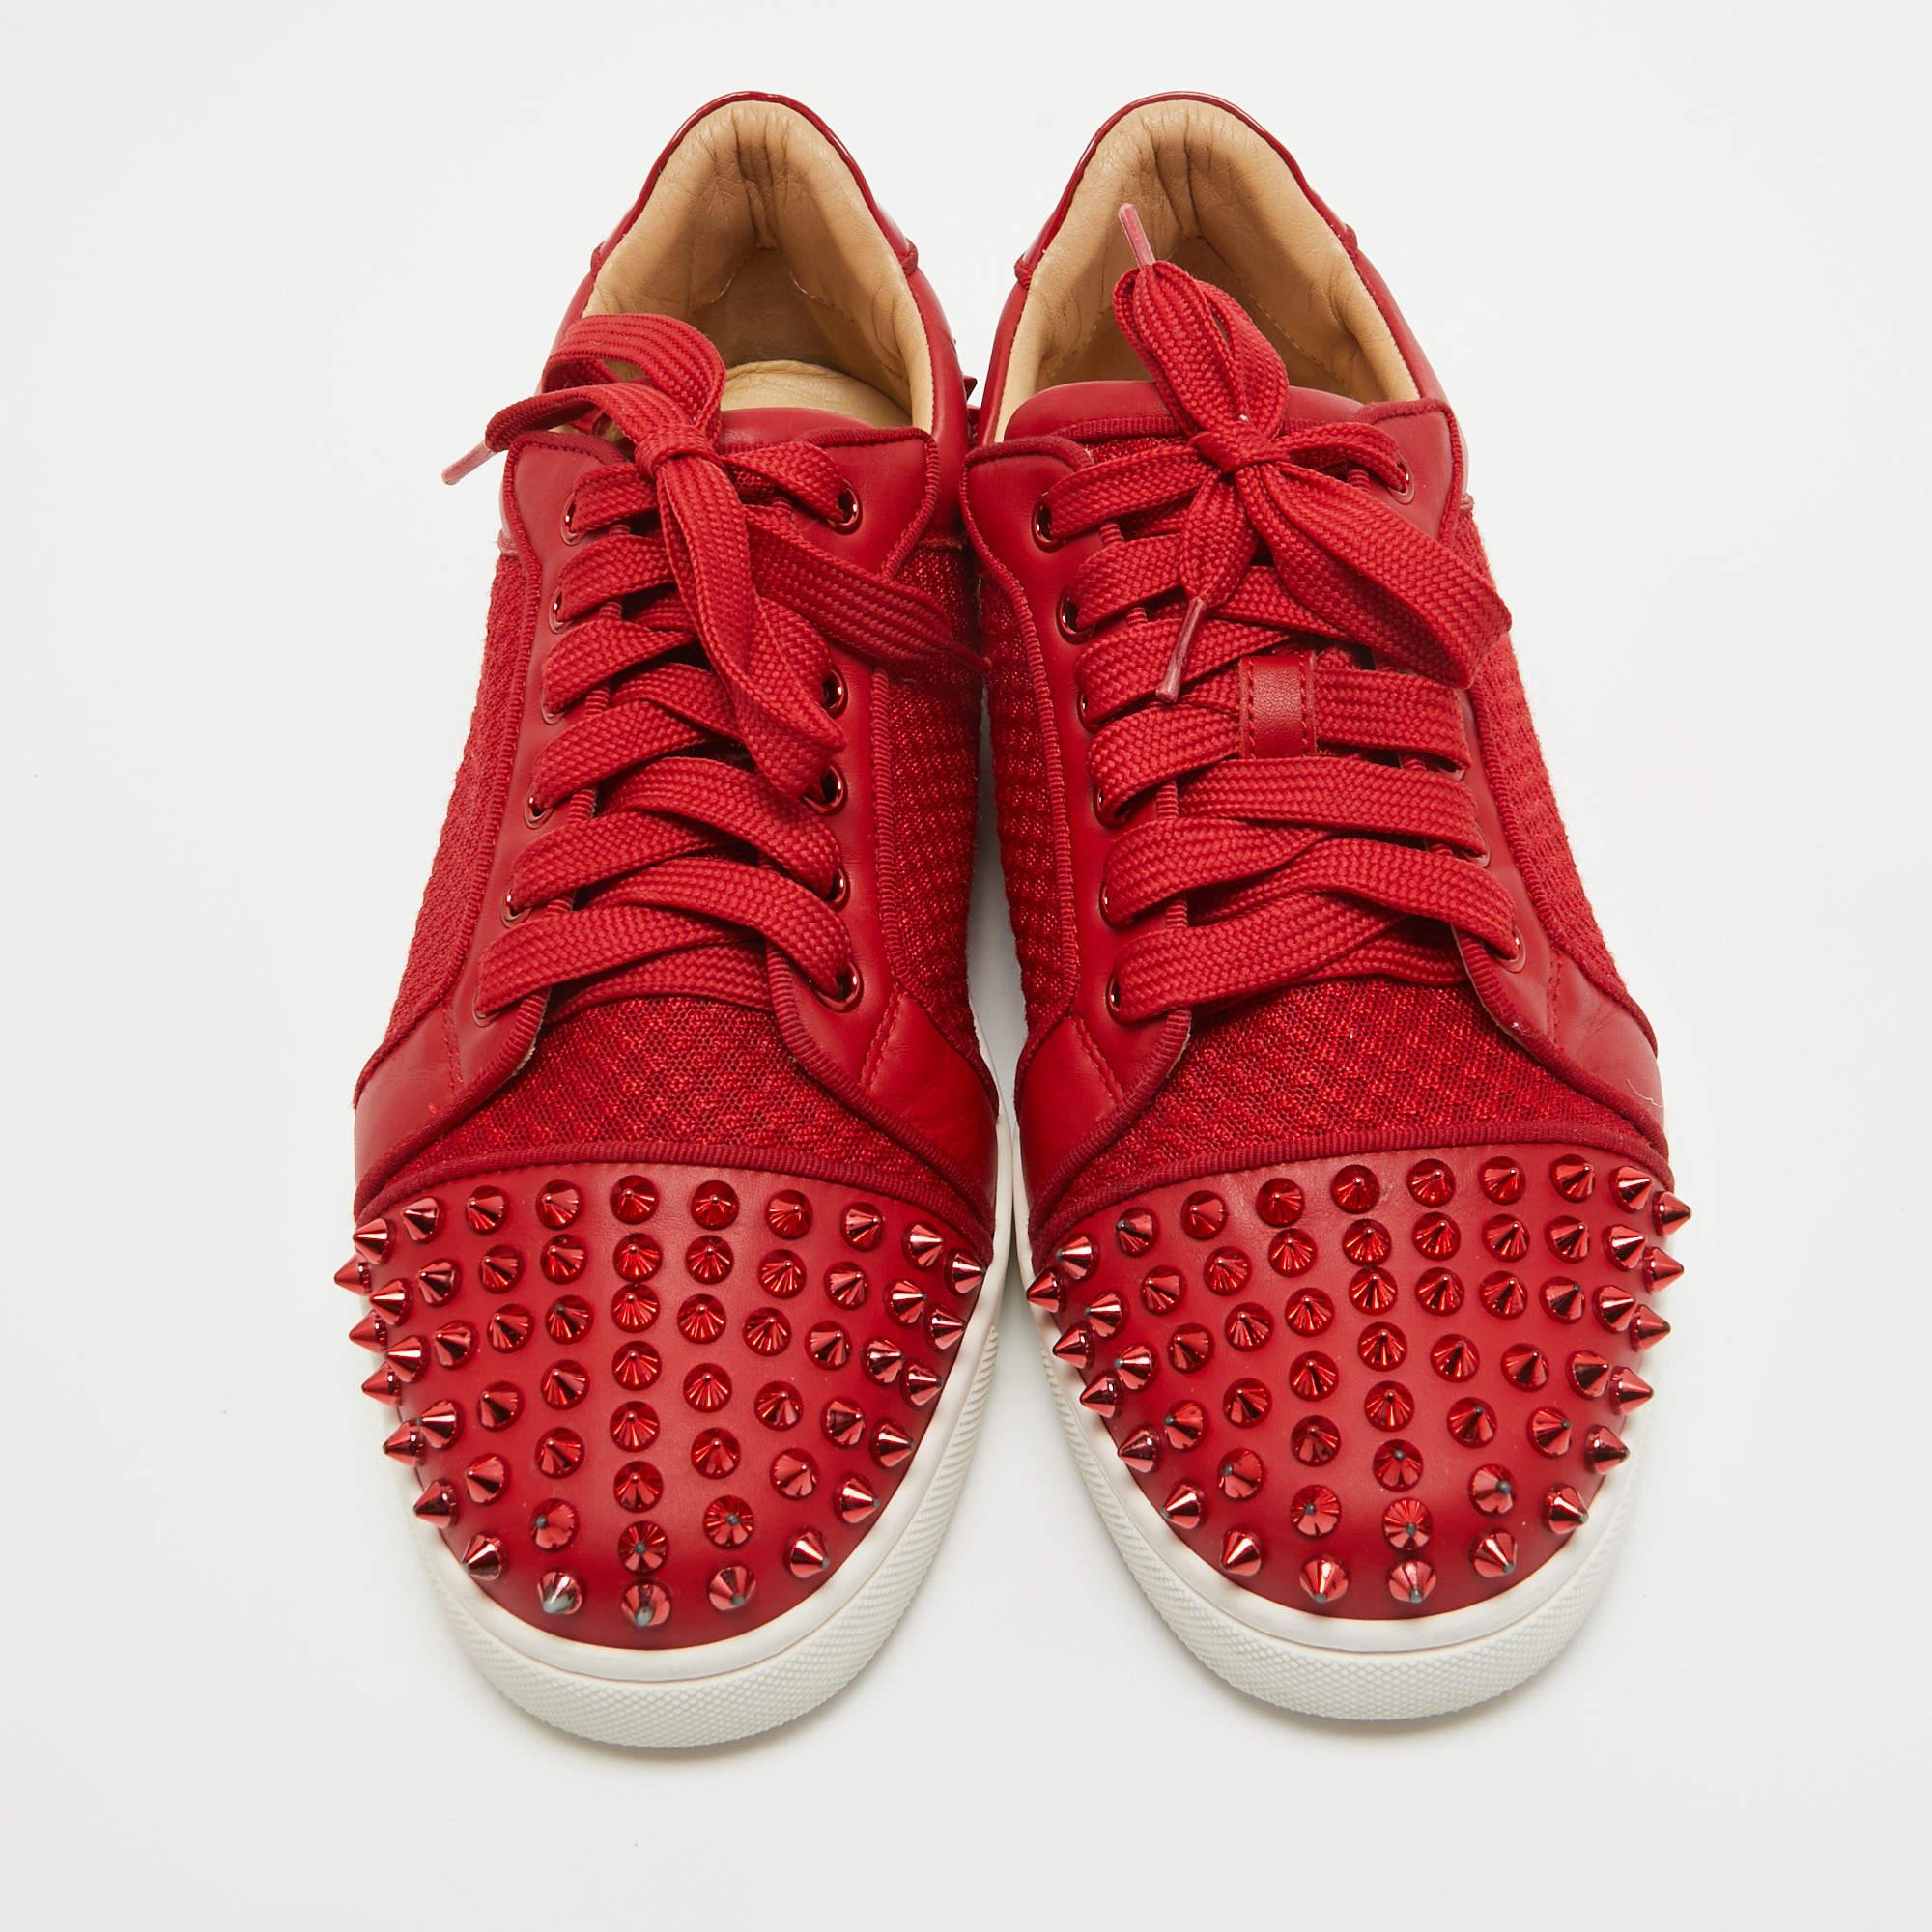 Christian Louboutin Red Mesh and Leather Vieira Spikes Low Top Sneakers Size 39 1